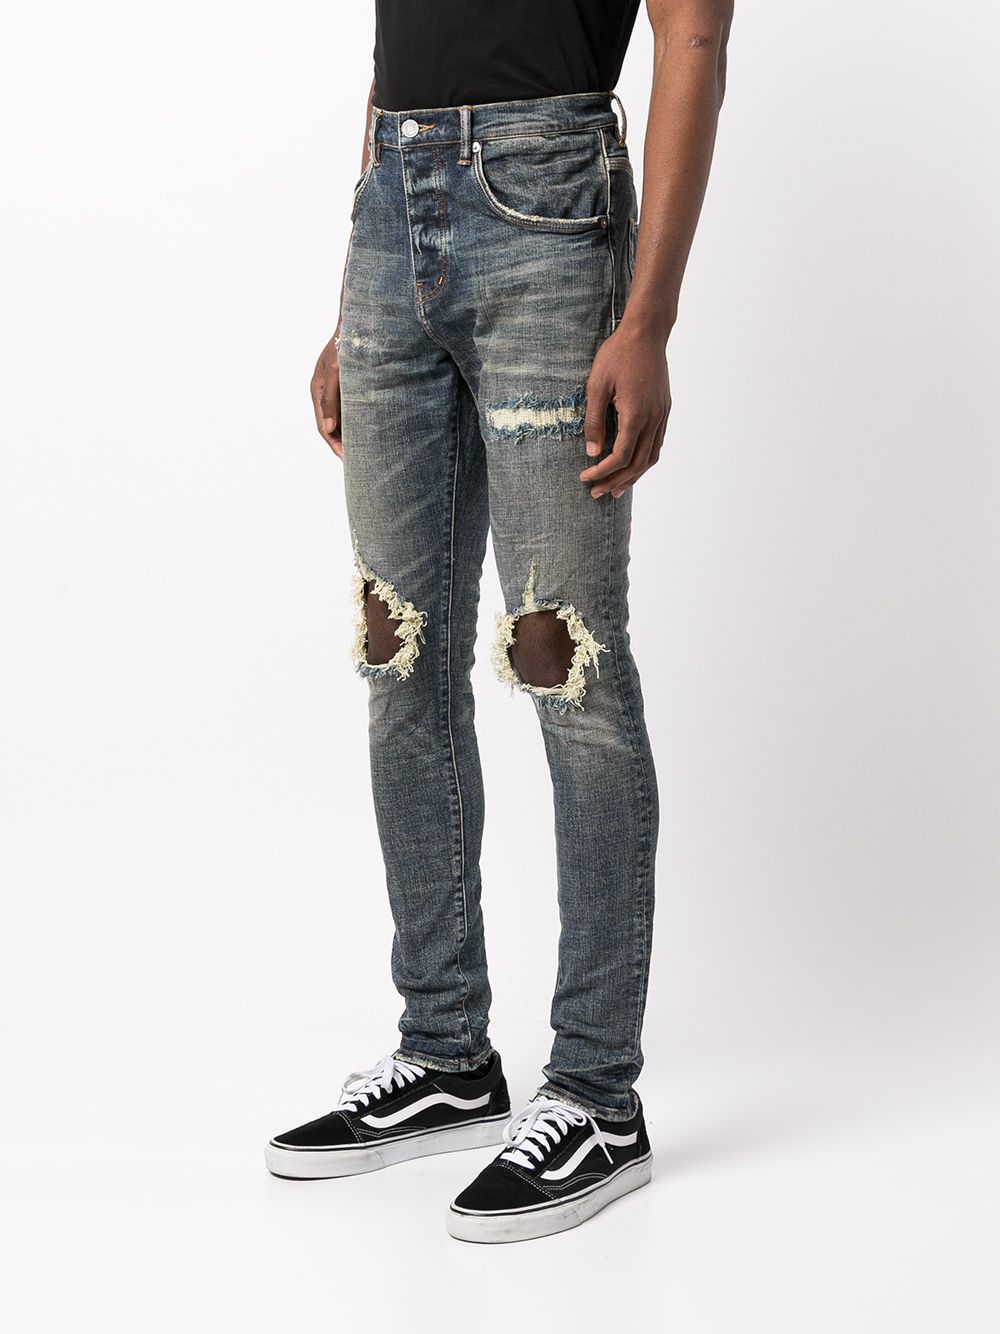 Purple-Brand Jeans - Faded Distressed and Ripped - Light Indigo - P002 –  Dabbous